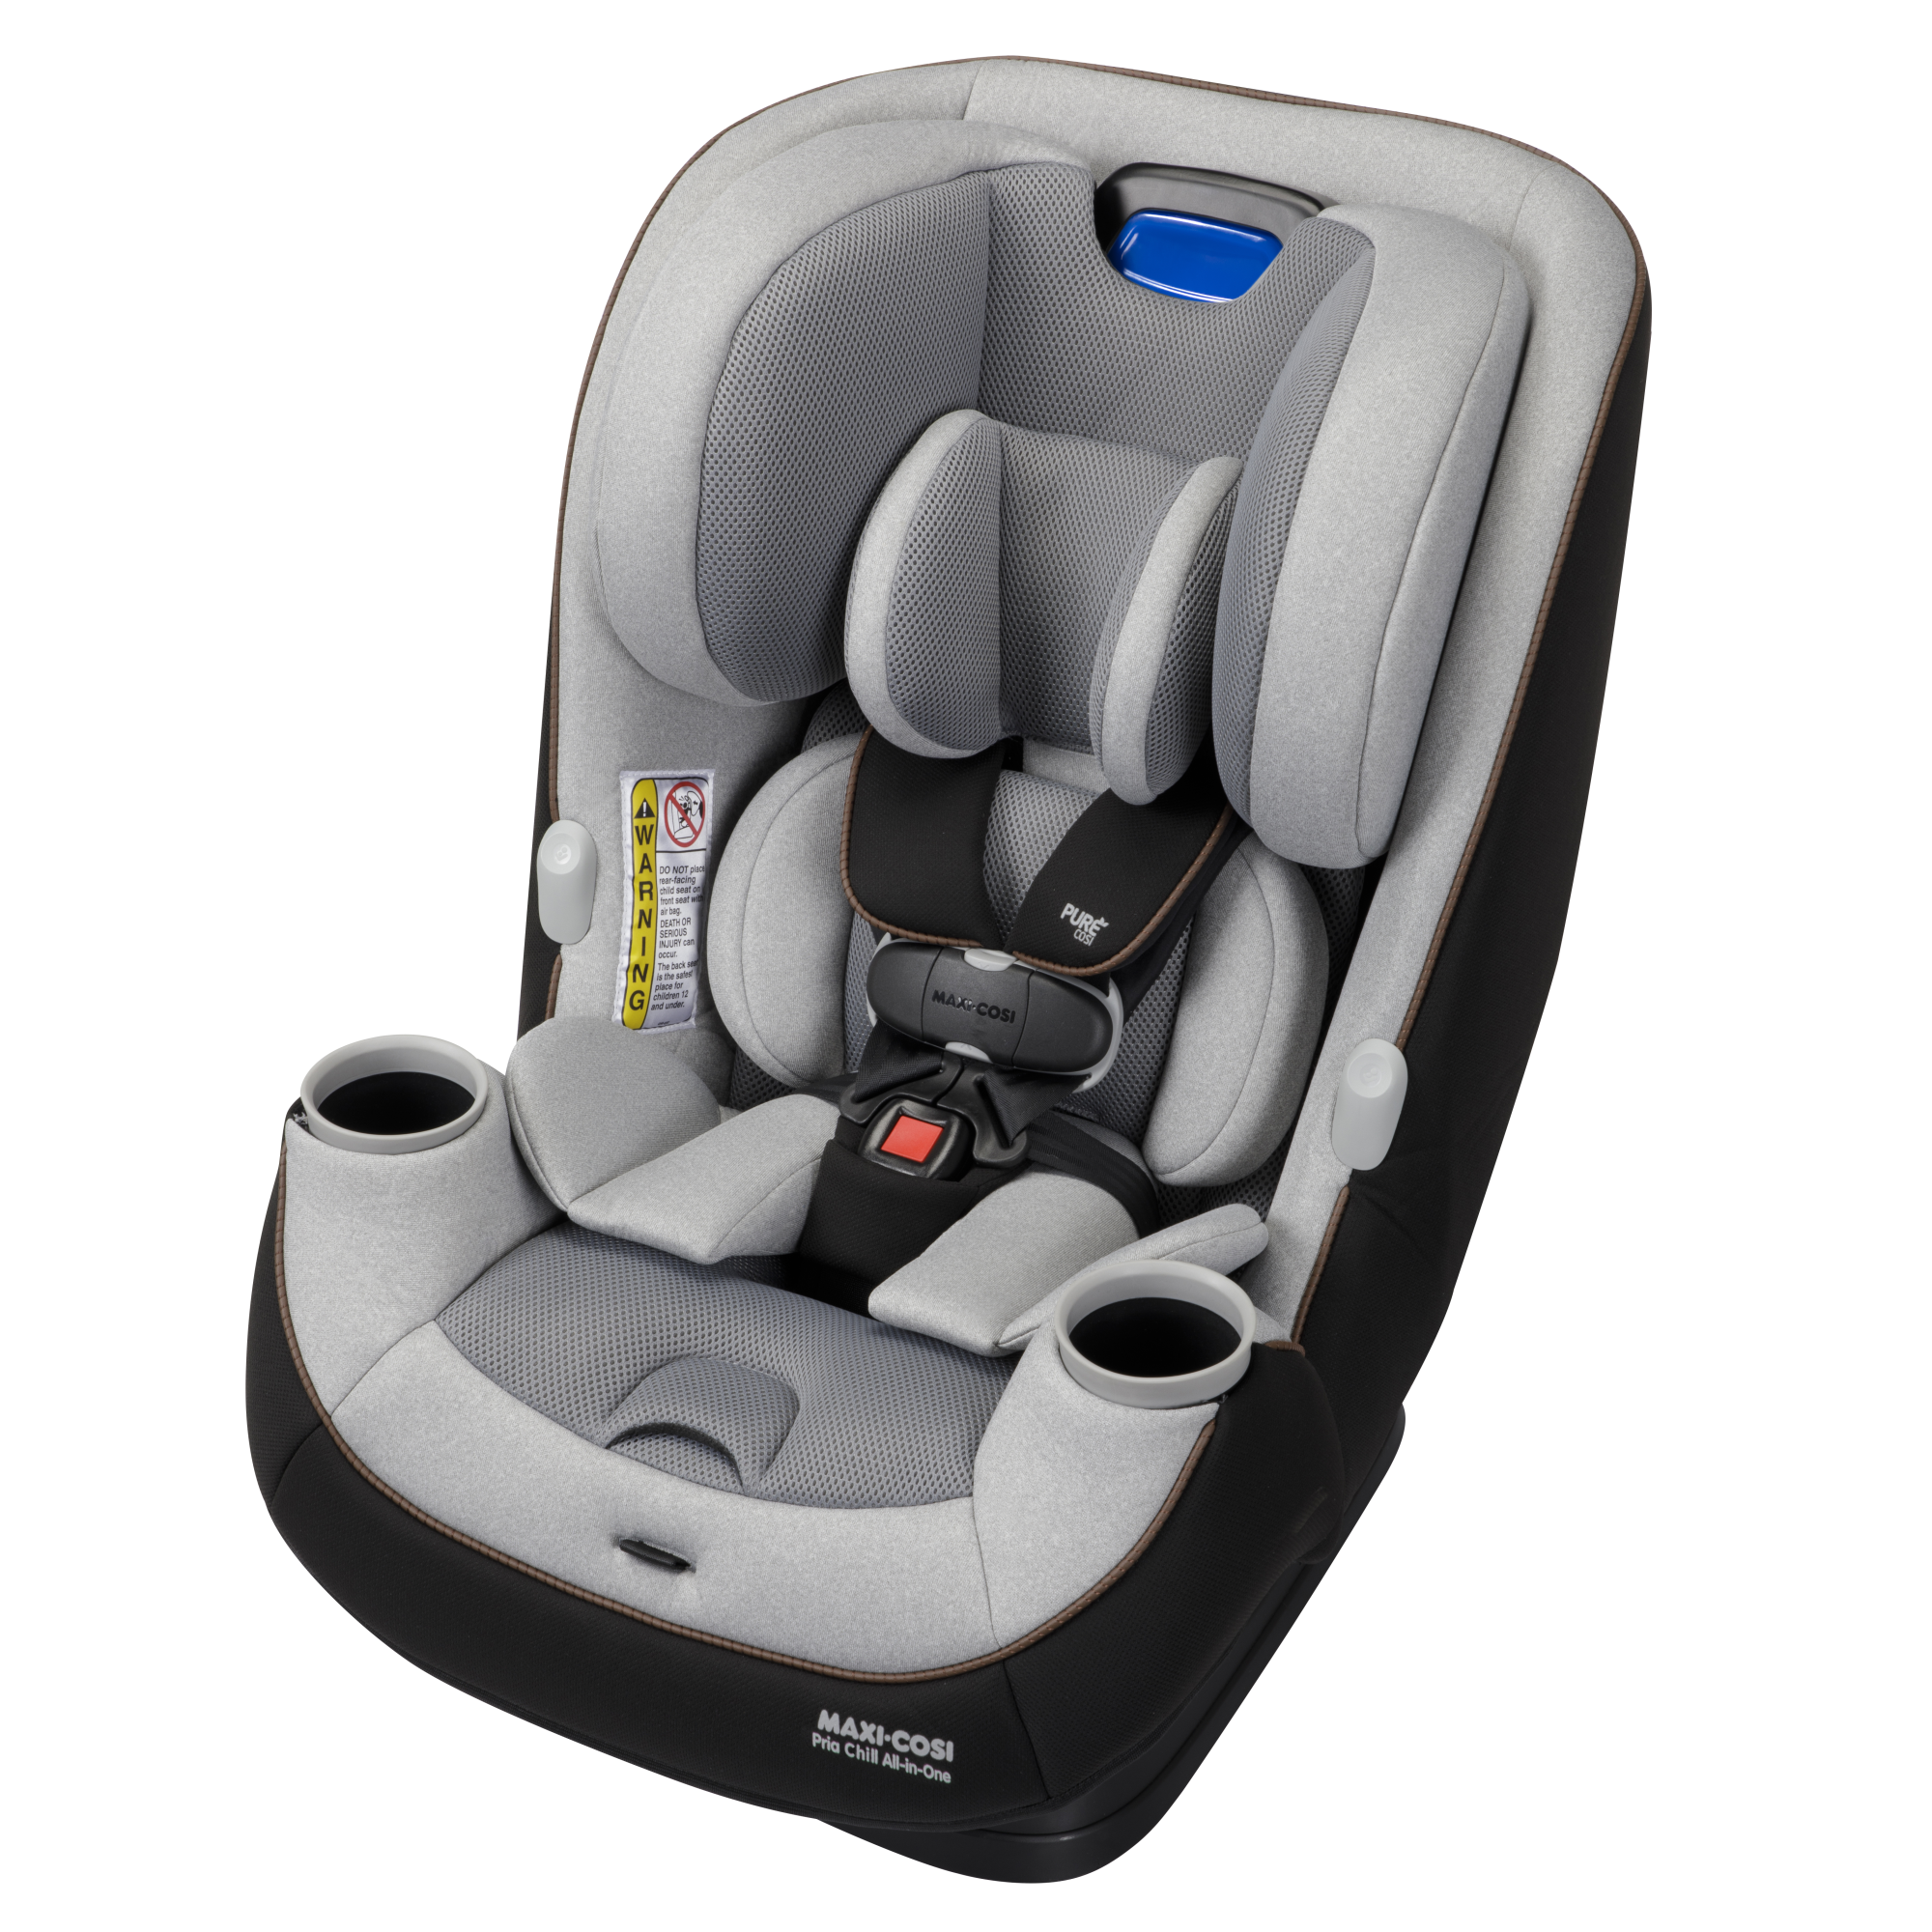 Pria Chill - baby wearing sunglasses and rear-facing in car seat